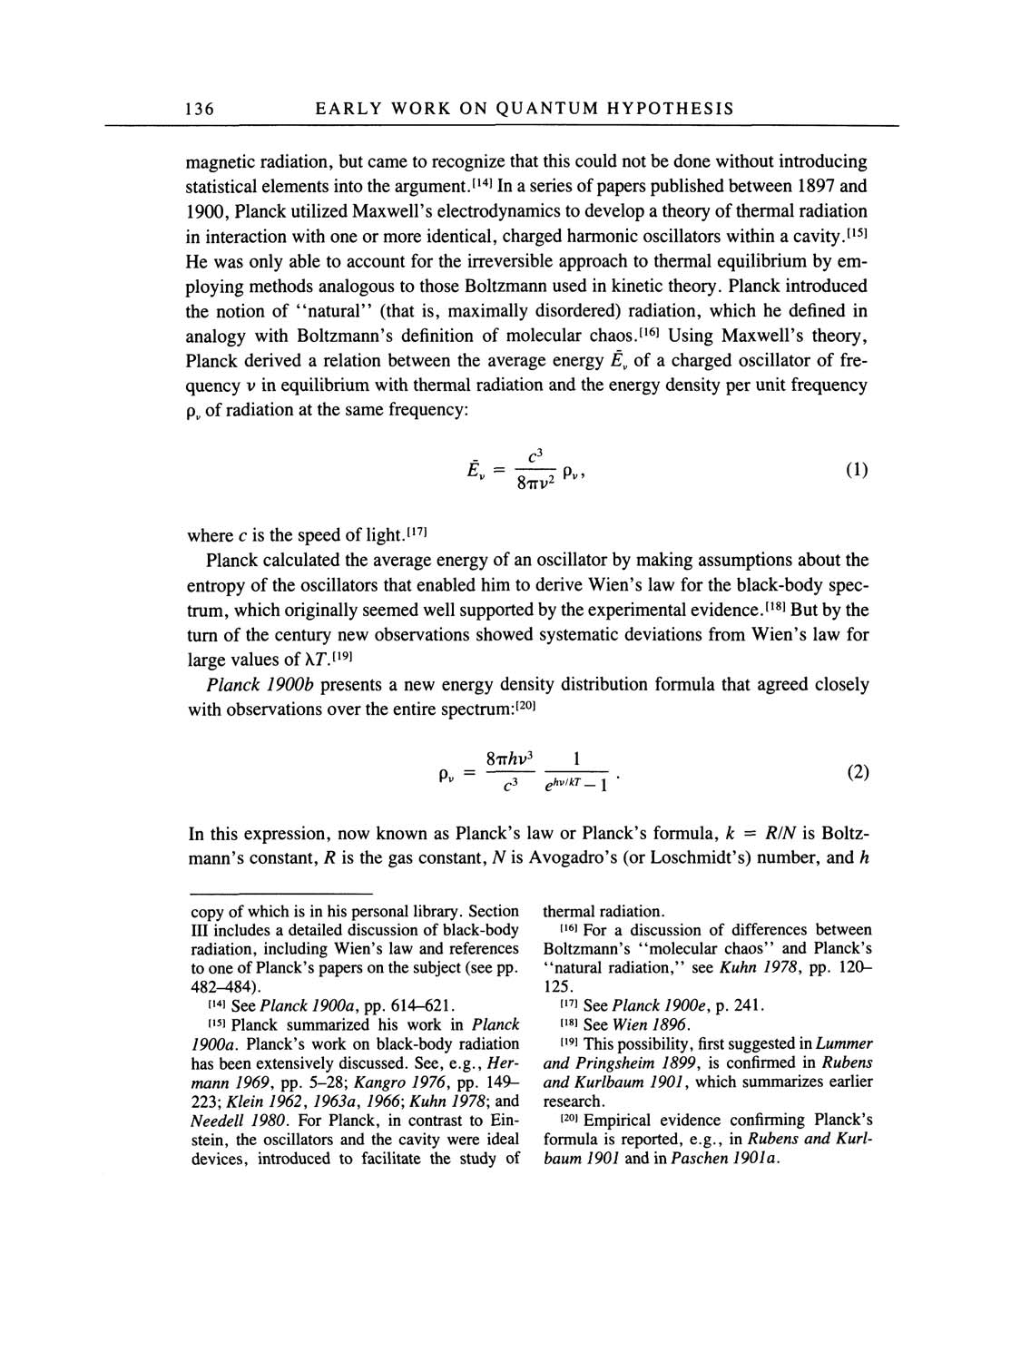 Volume 2: The Swiss Years: Writings, 1900-1909 page 136